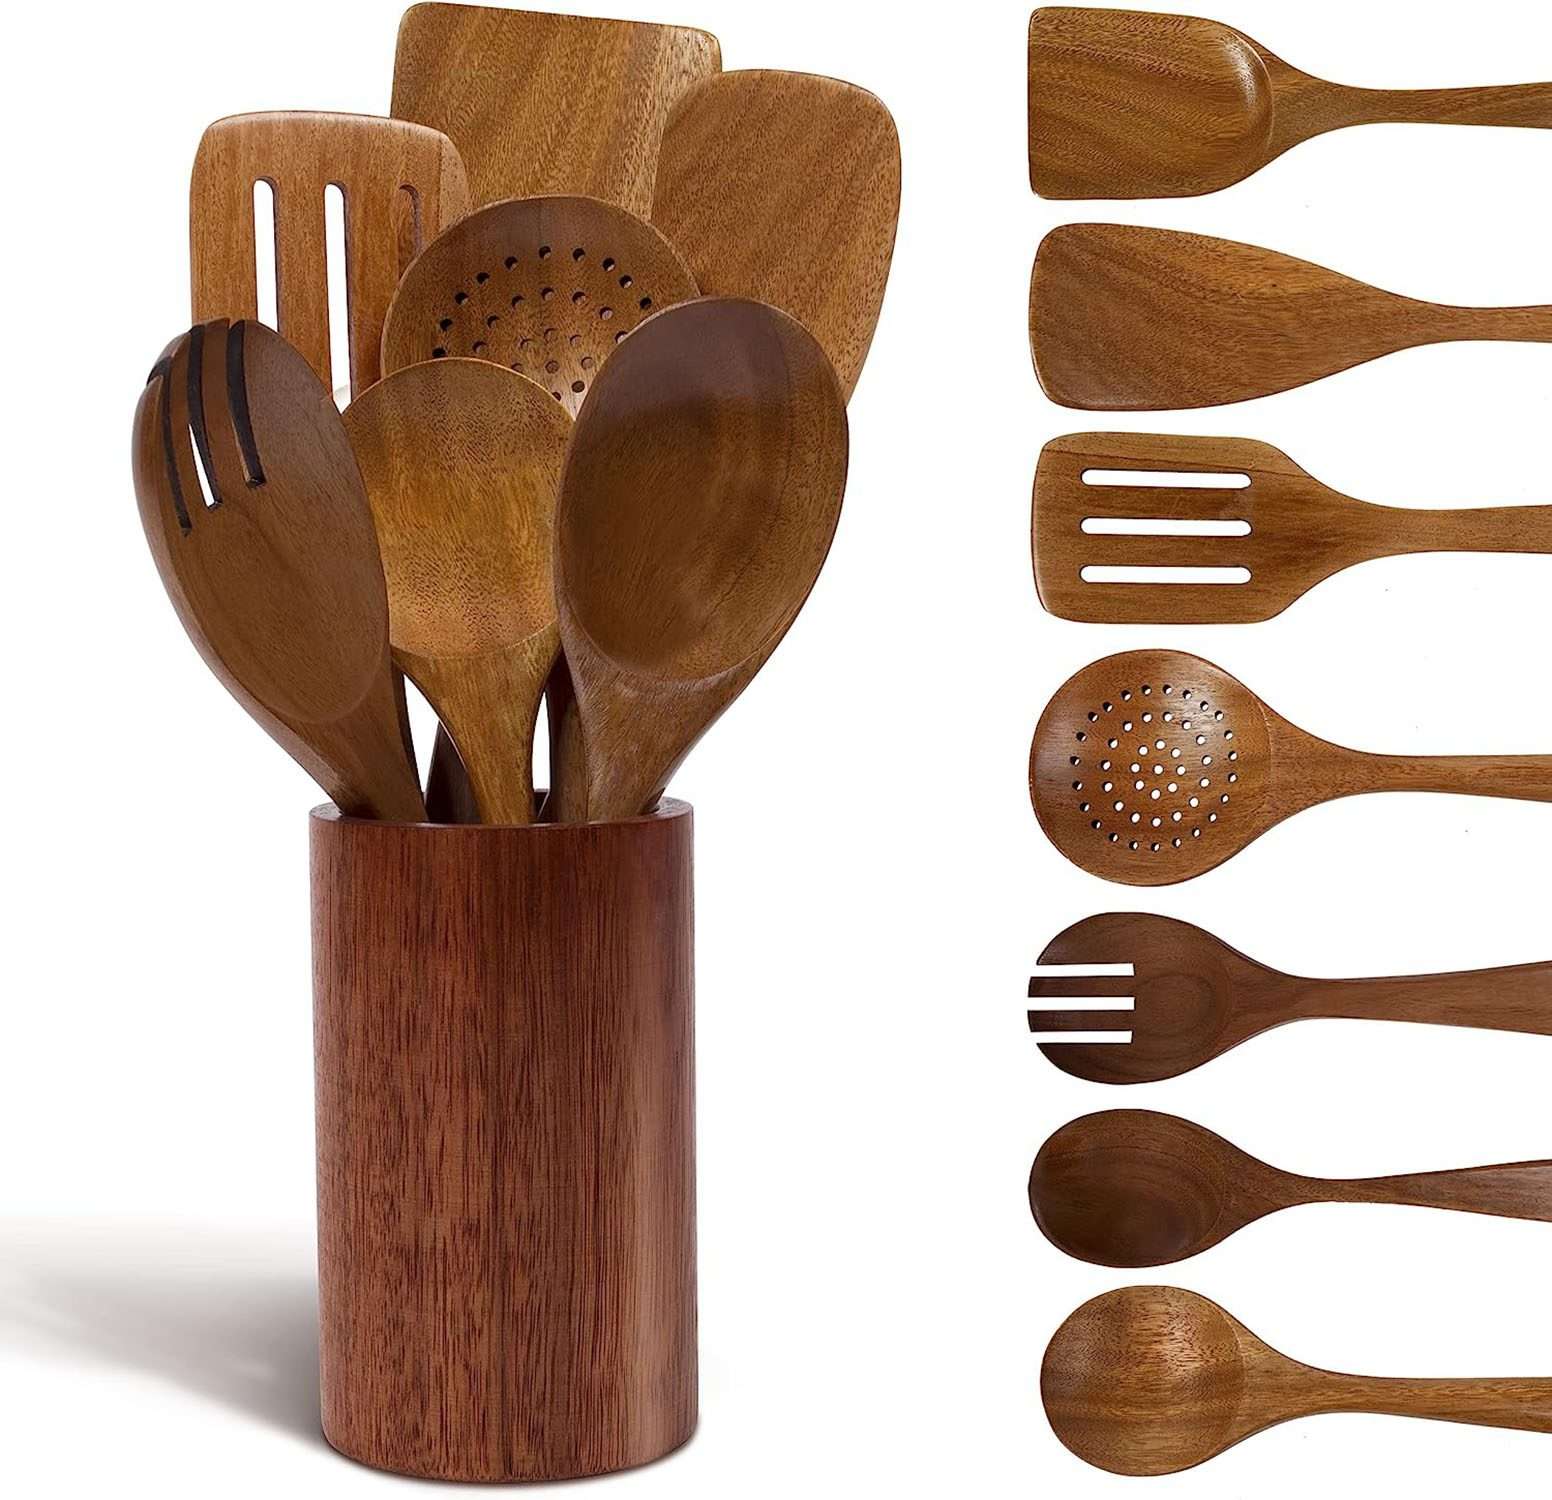 Handcrafted Wooden Spoons | for Cooking-Kitchen utensils set with holder| made with Acacia wood